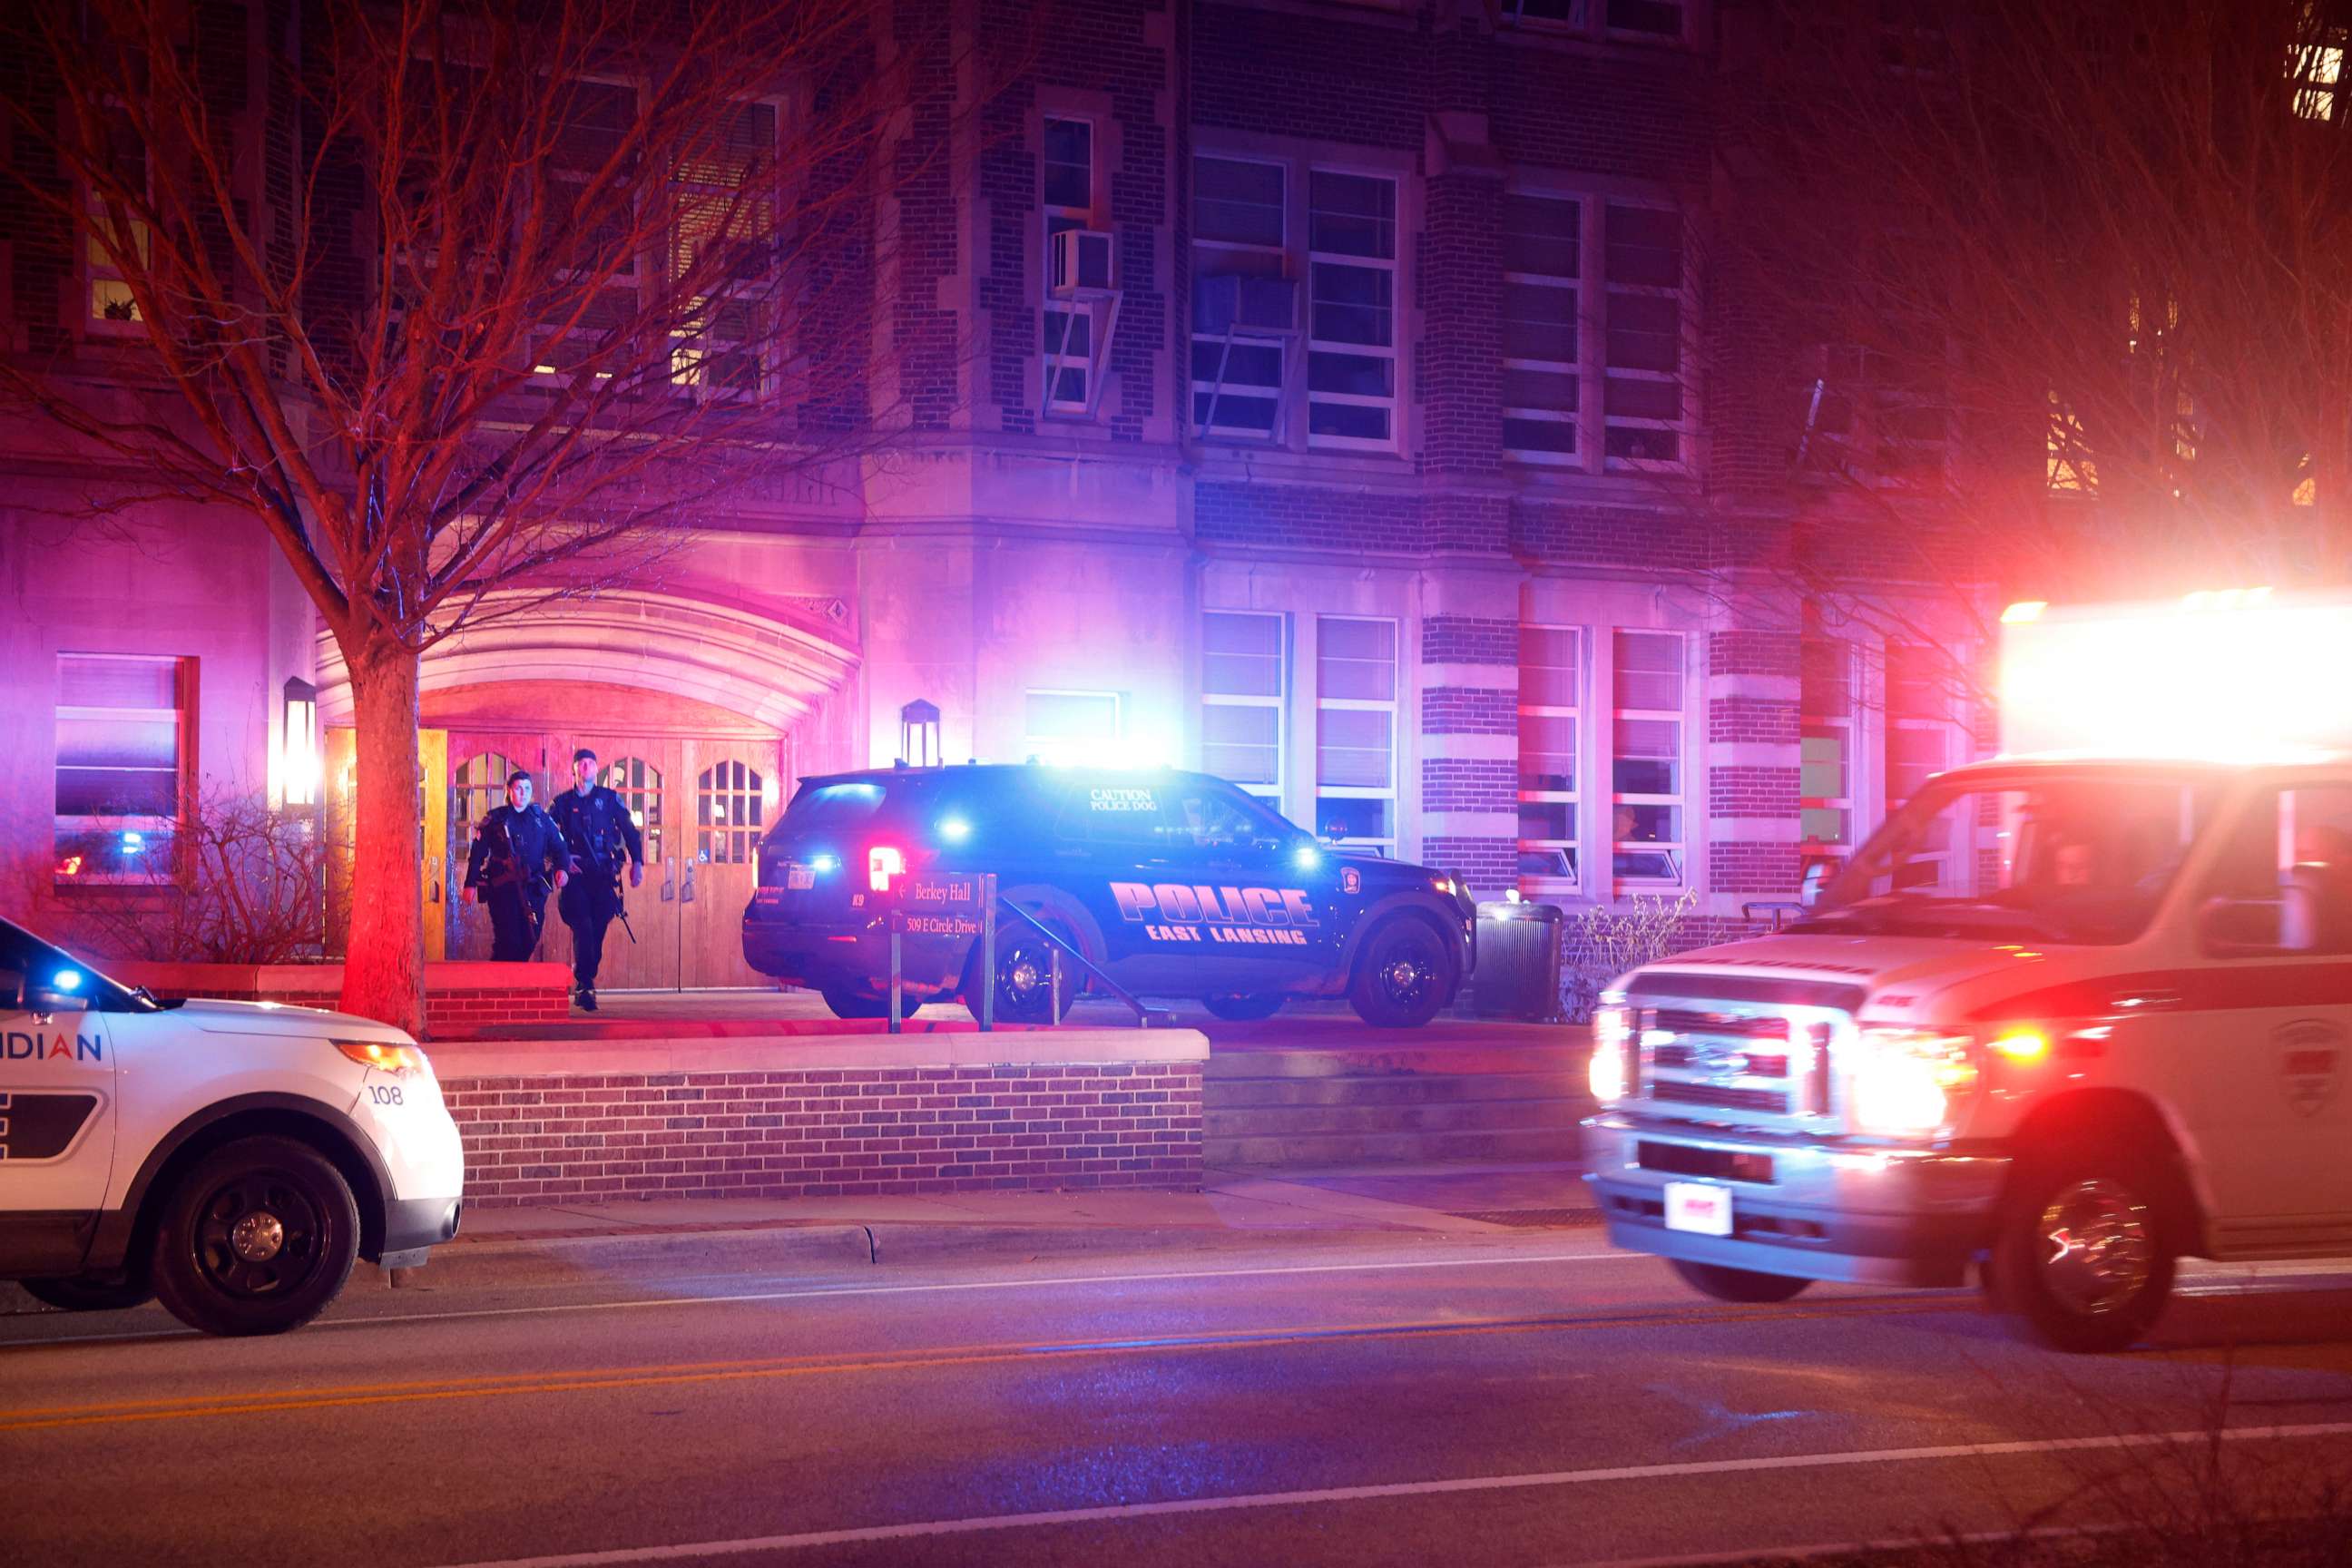 PHOTO: Police investigate the scene of a shooting at Berkey Hall on the campus of Michigan State University, late Monday, Feb. 13, 2023, in East Lansing, Michigan.